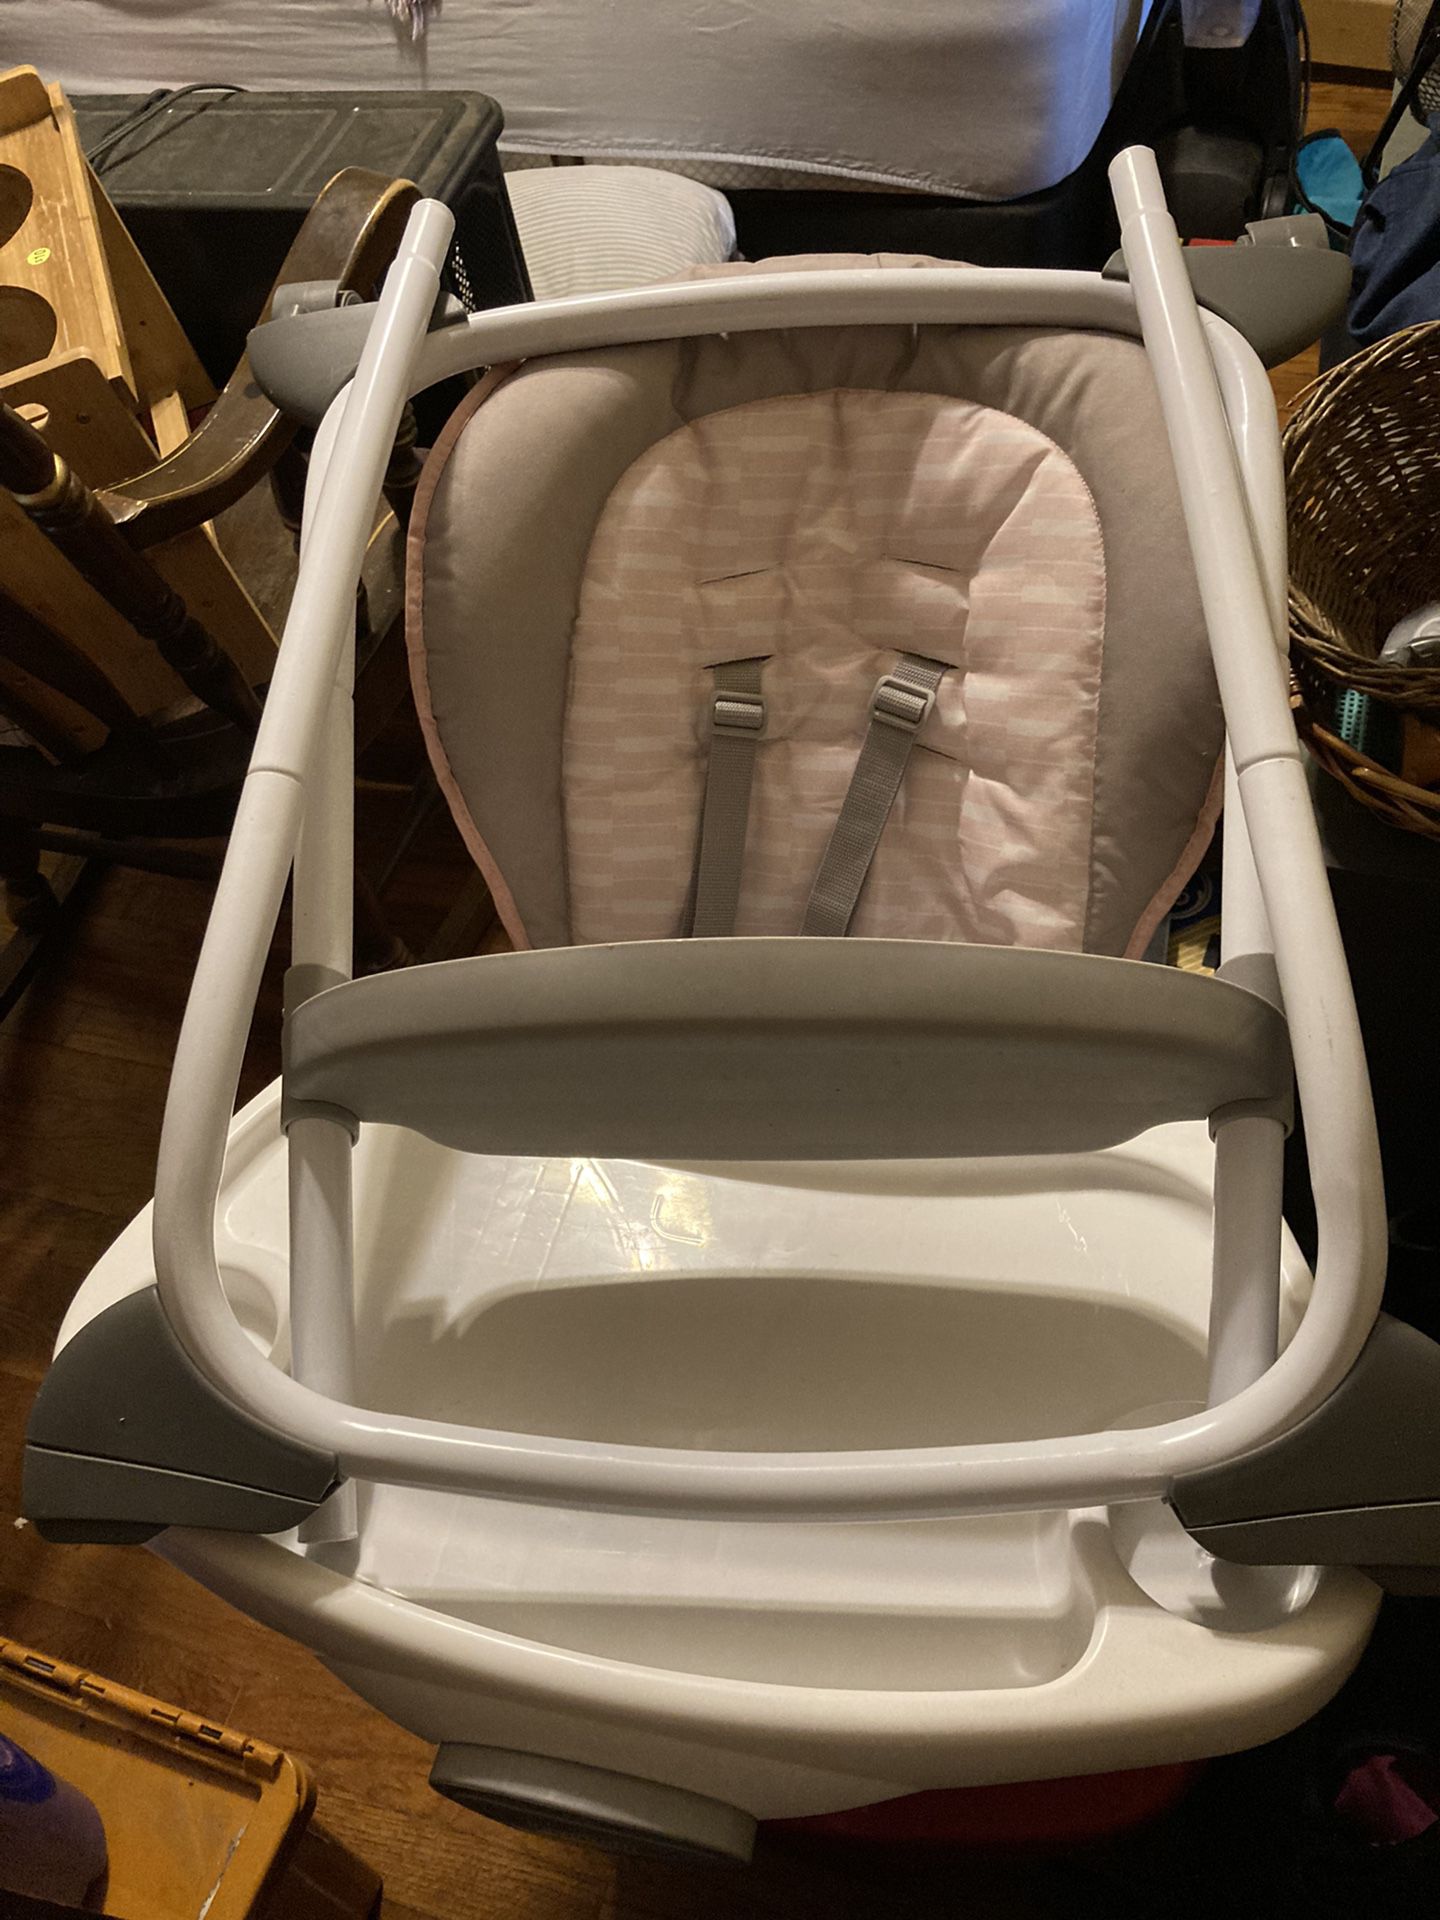 4 In 1 High chair 